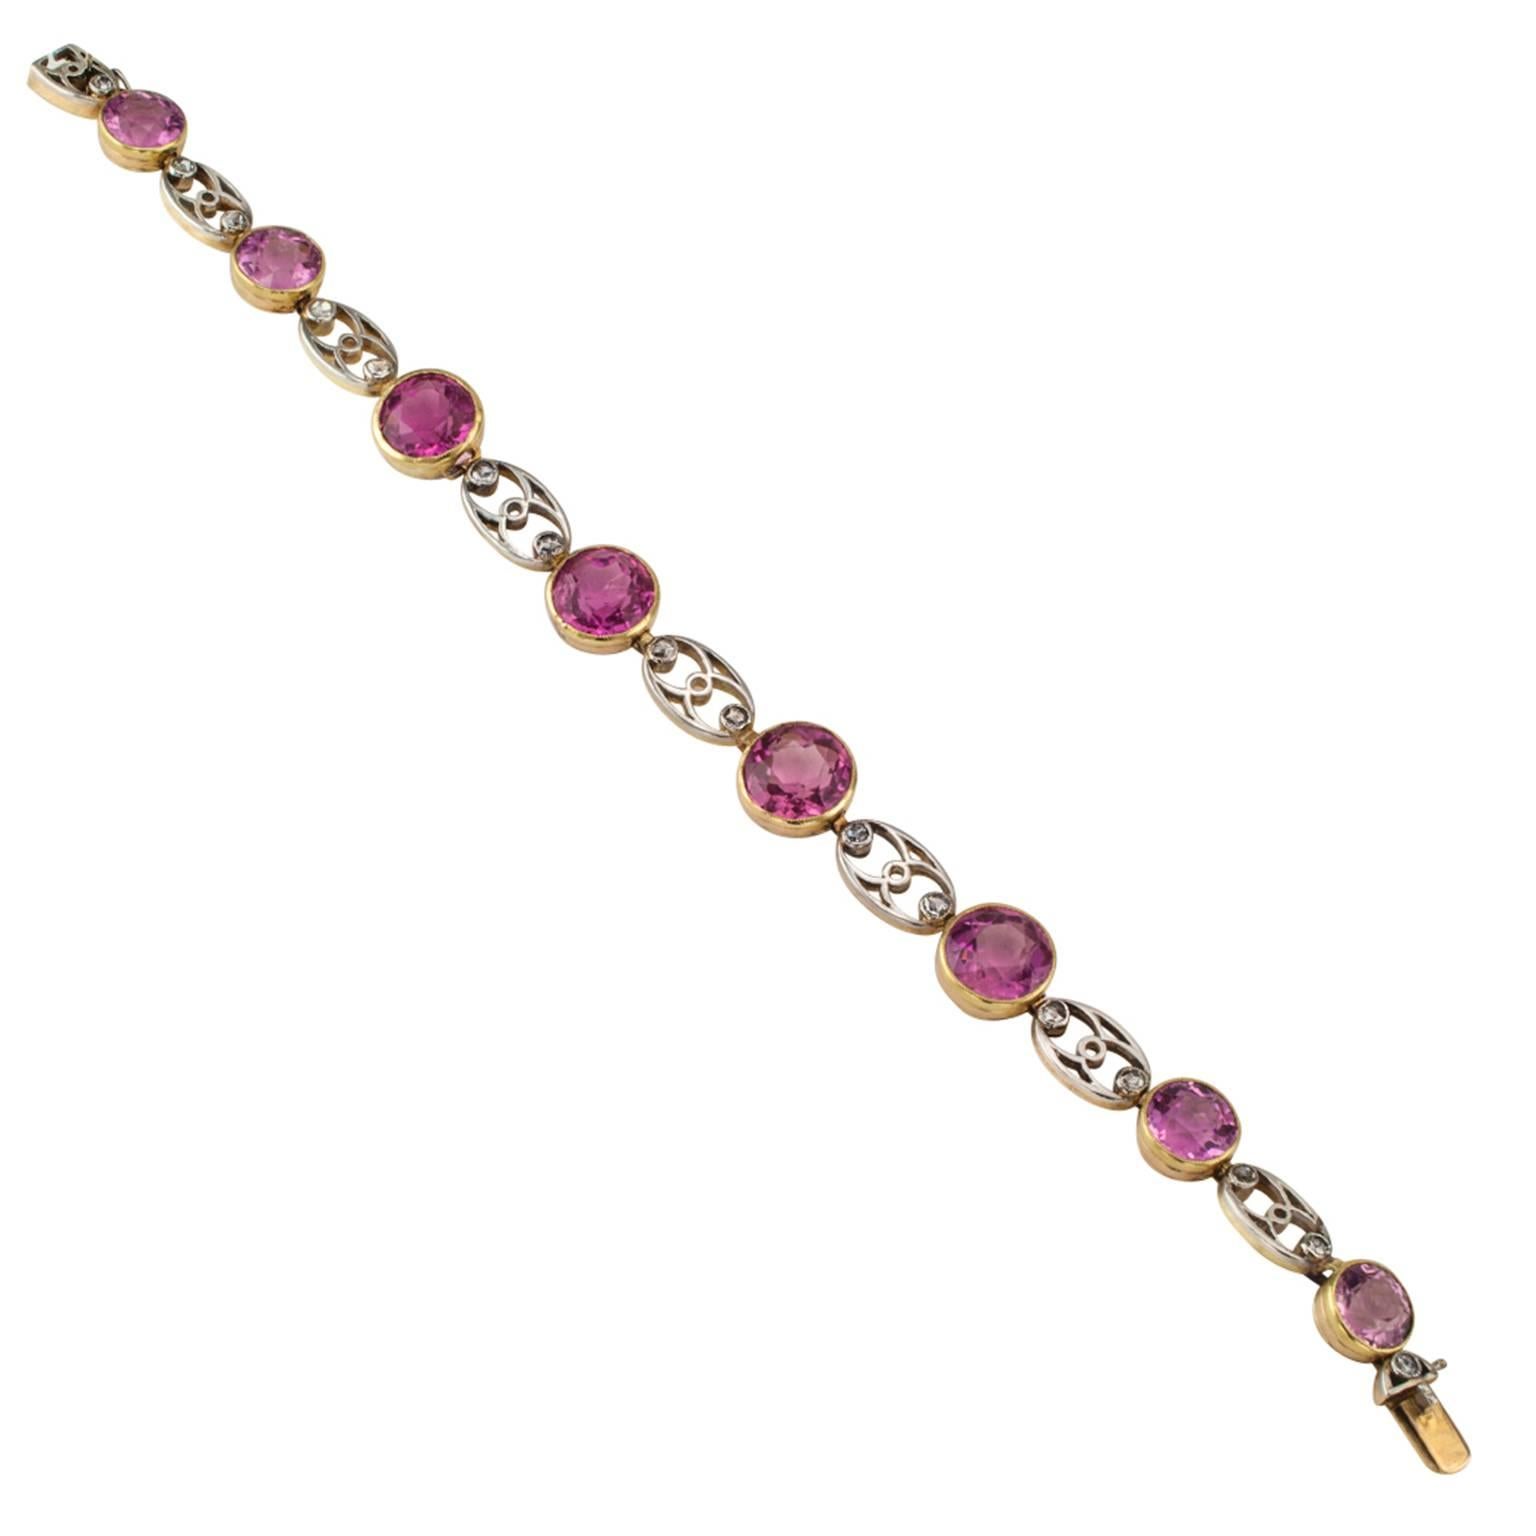 Edwardian Pink Tourmaline and Rose-Cut Diamond Bracelet

The Edwardians and their romantic designs, these pink tourmalines are so pretty and outstanding, hushed key players, like the roses in a carefully chosen bouquet.  This is a splendid